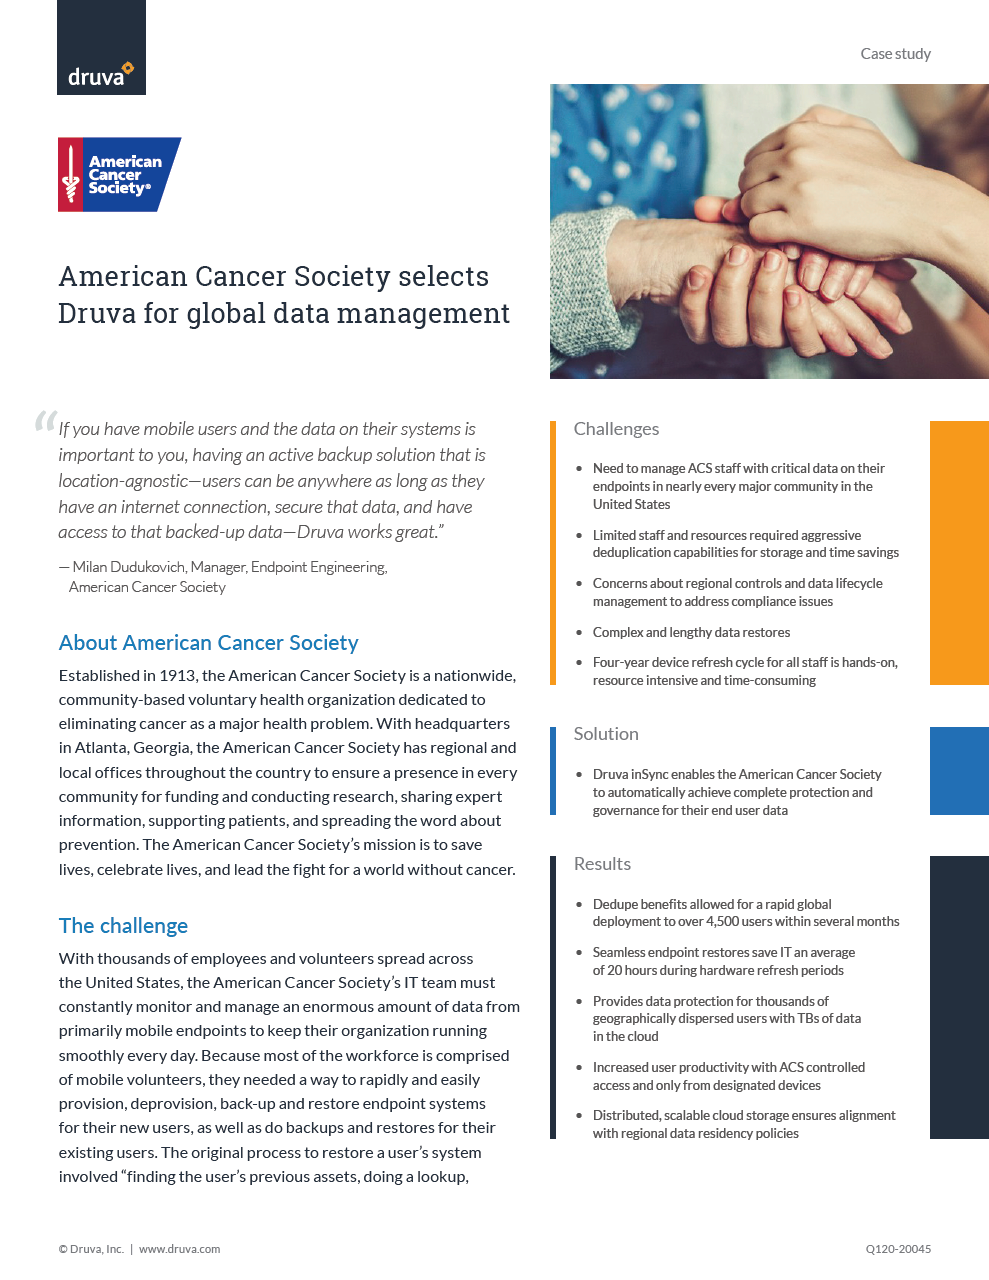 American Cancer Society selects Druva for global data management